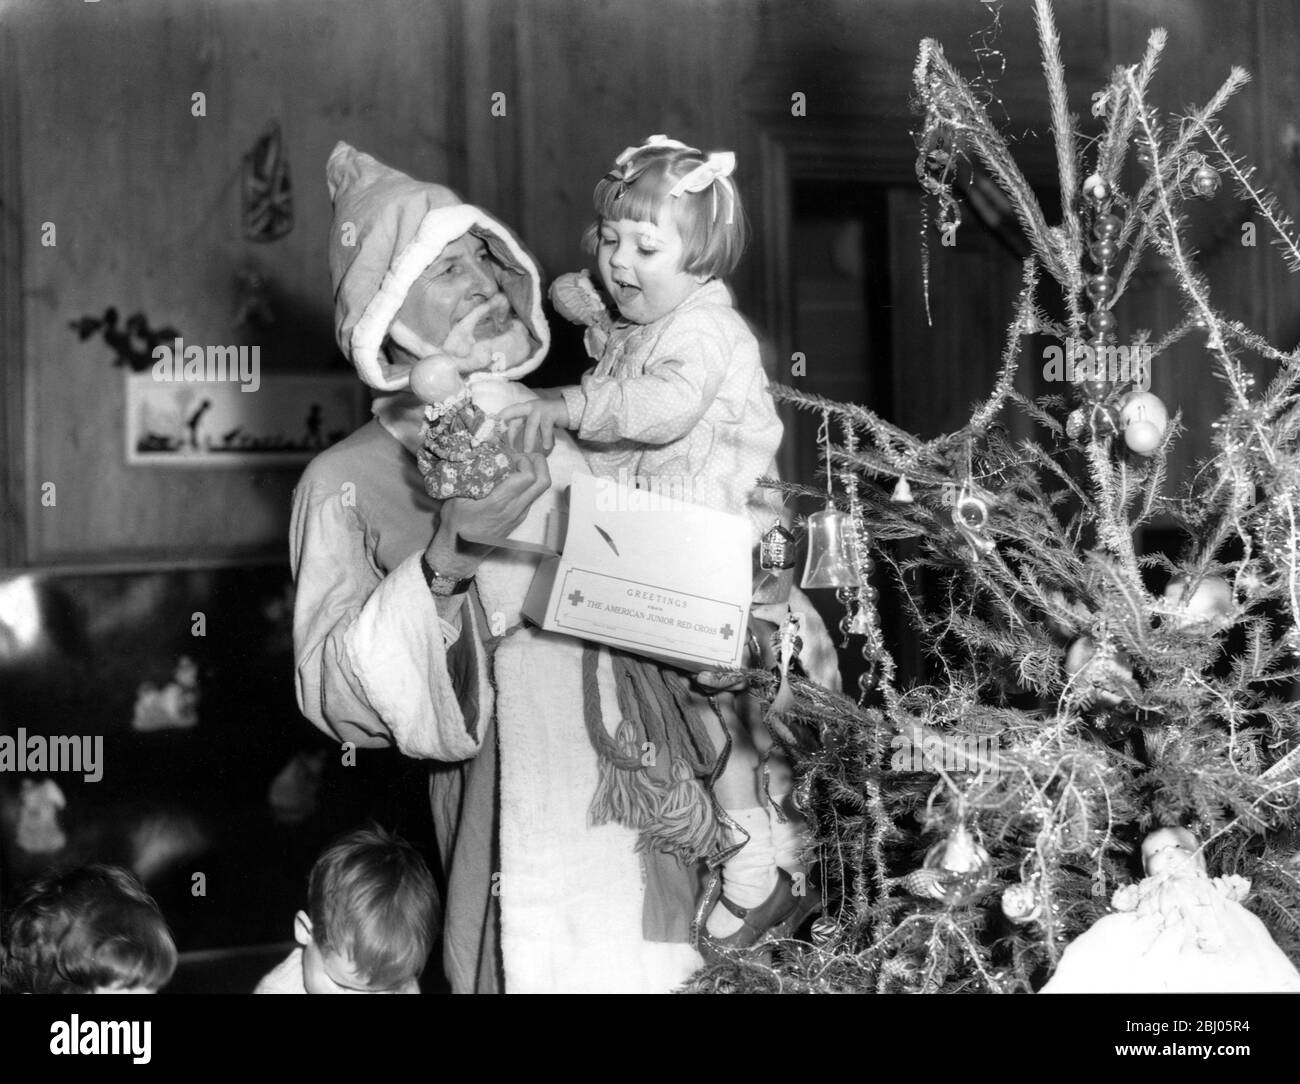 Christmas Cheer from America for bombed and evacuated London children. Children at the WVS Nursery at Hanover Lodge, Regent's Park who are waiting to be evacuated to nurseries in the country, received their Christmas gifts at a party at which Mr Bernard Carter, the American Red Cross delegate in Great Britain, acted as Father Christmas. Mr Bernard Carter with a happy little girl after she received her gift. - 20th December 1941 Stock Photo